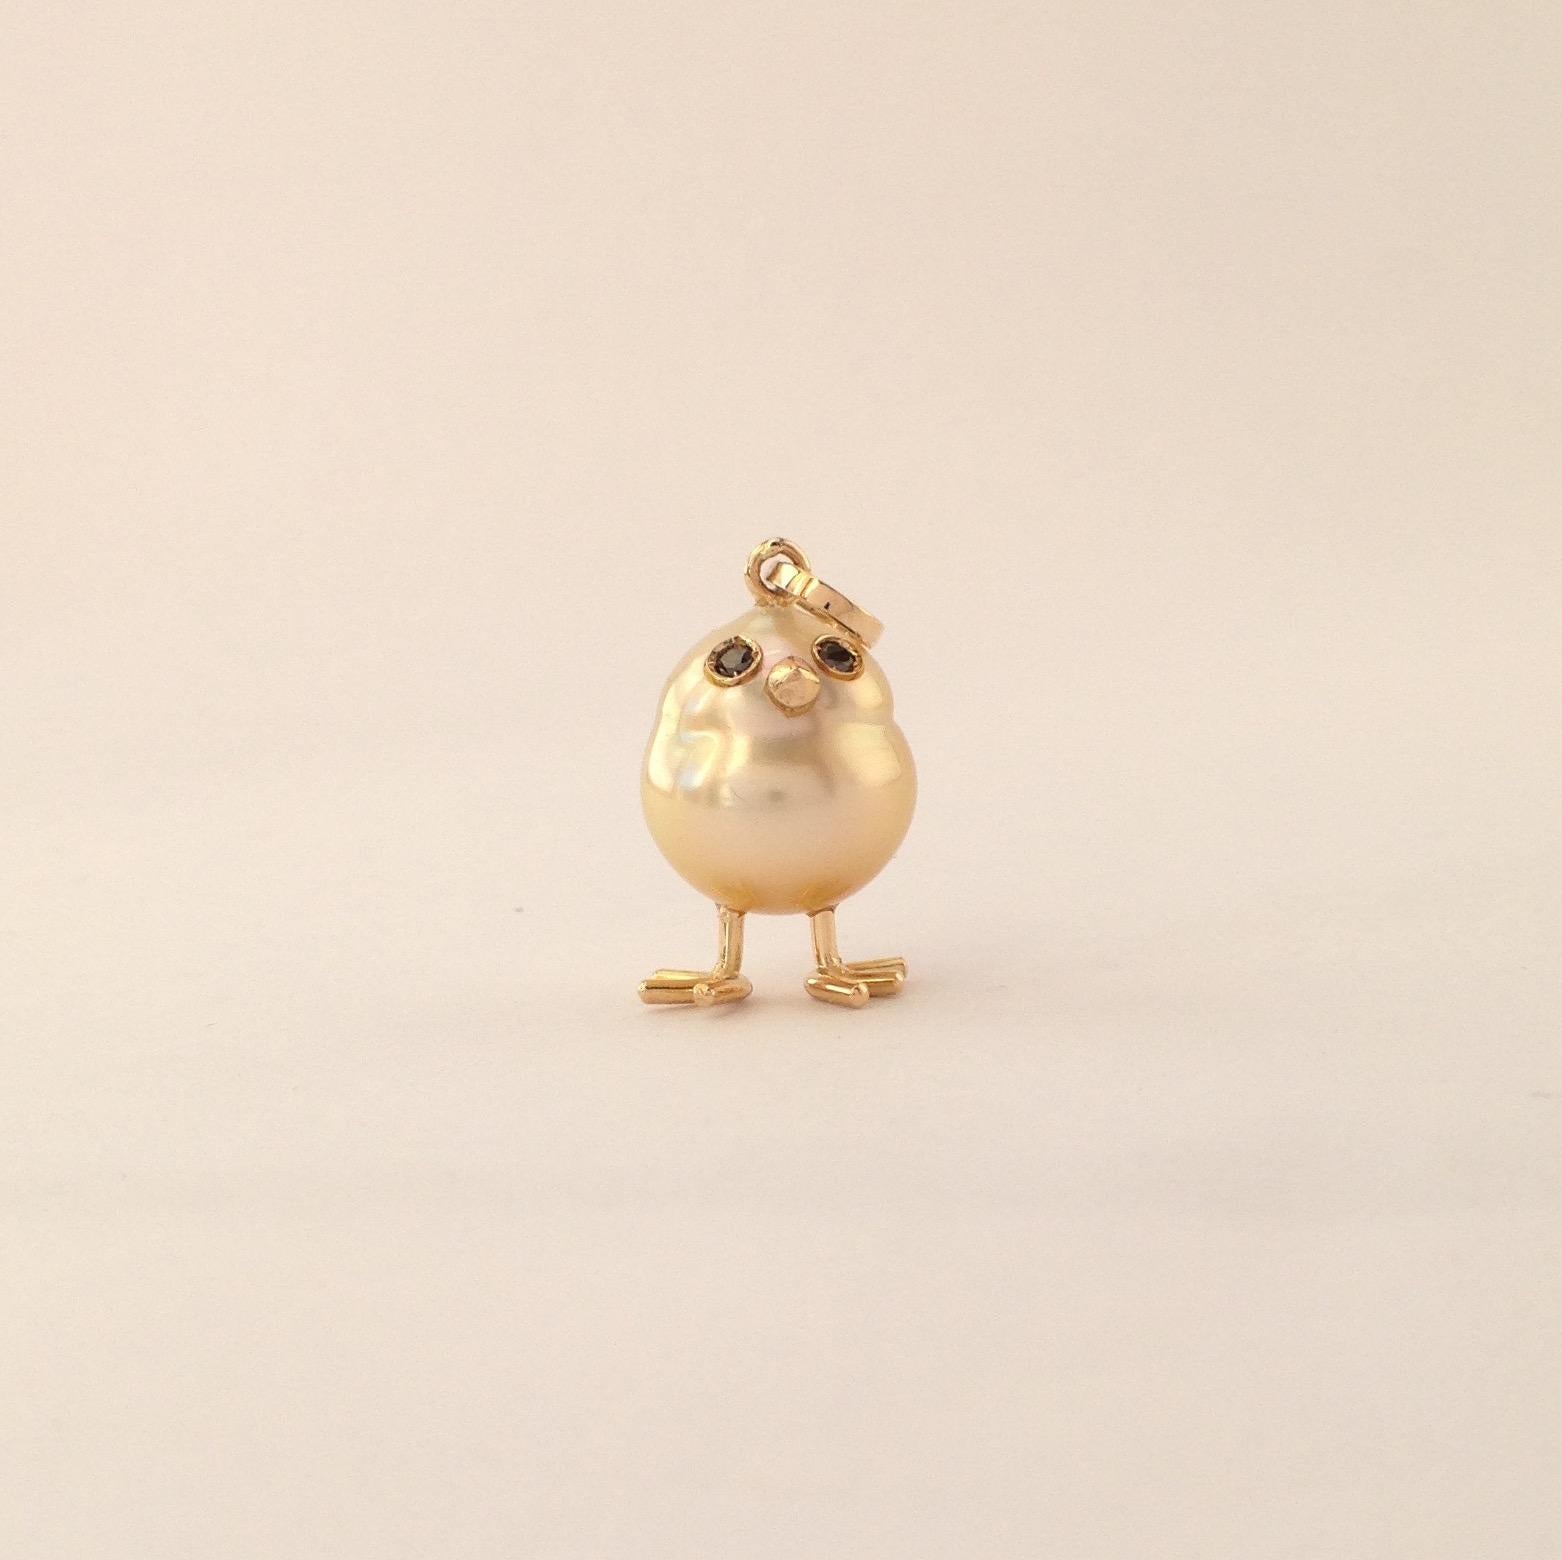 A spherical rare Australian pearl has been carefully crafted to make a chick. He has his two legs, two eyes encrusted with two black diamonds and his beak. The color of the pearl is slightly.
The gold is yellow.
The caliber is ct 0.03.